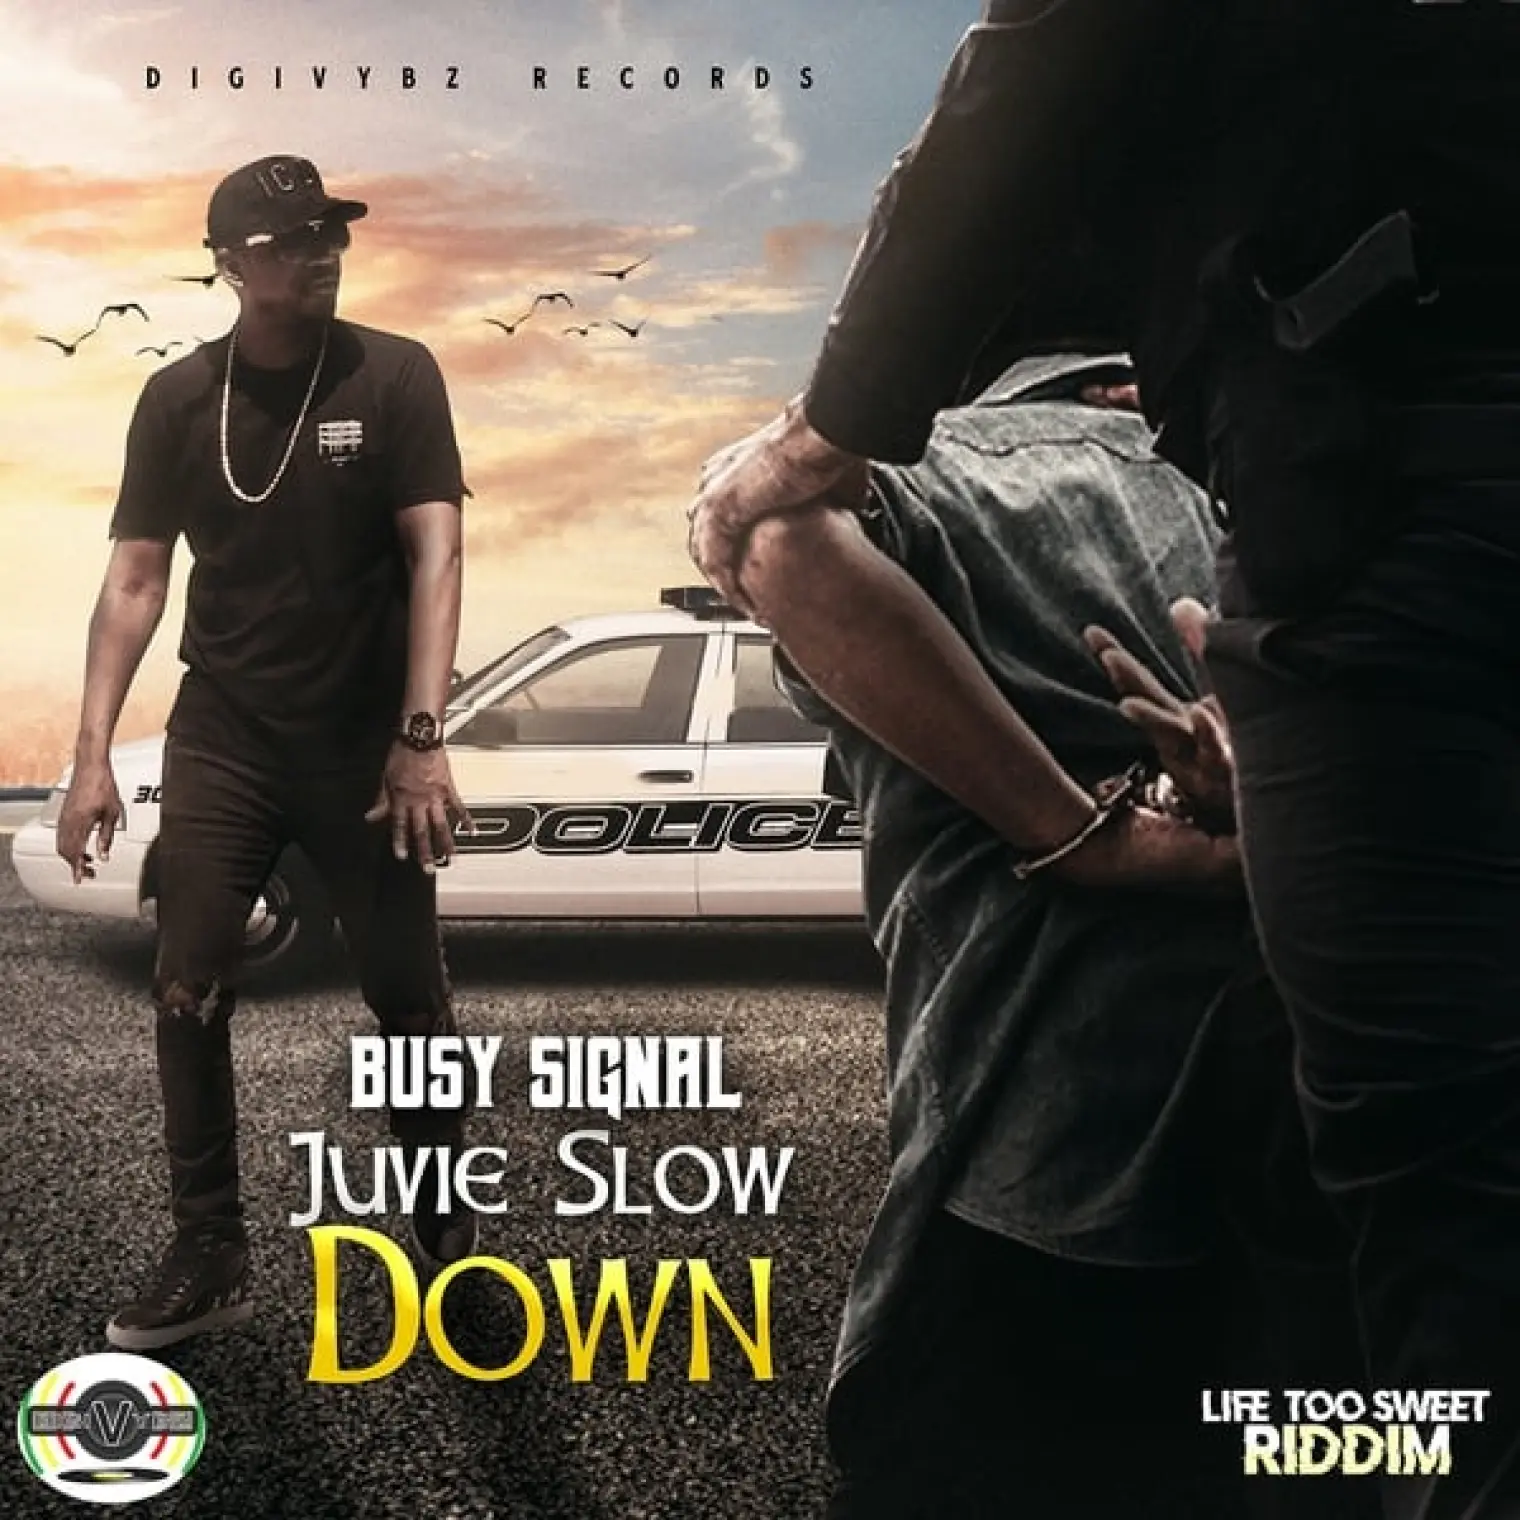 Juvie Slow Down -  Busy Signal 